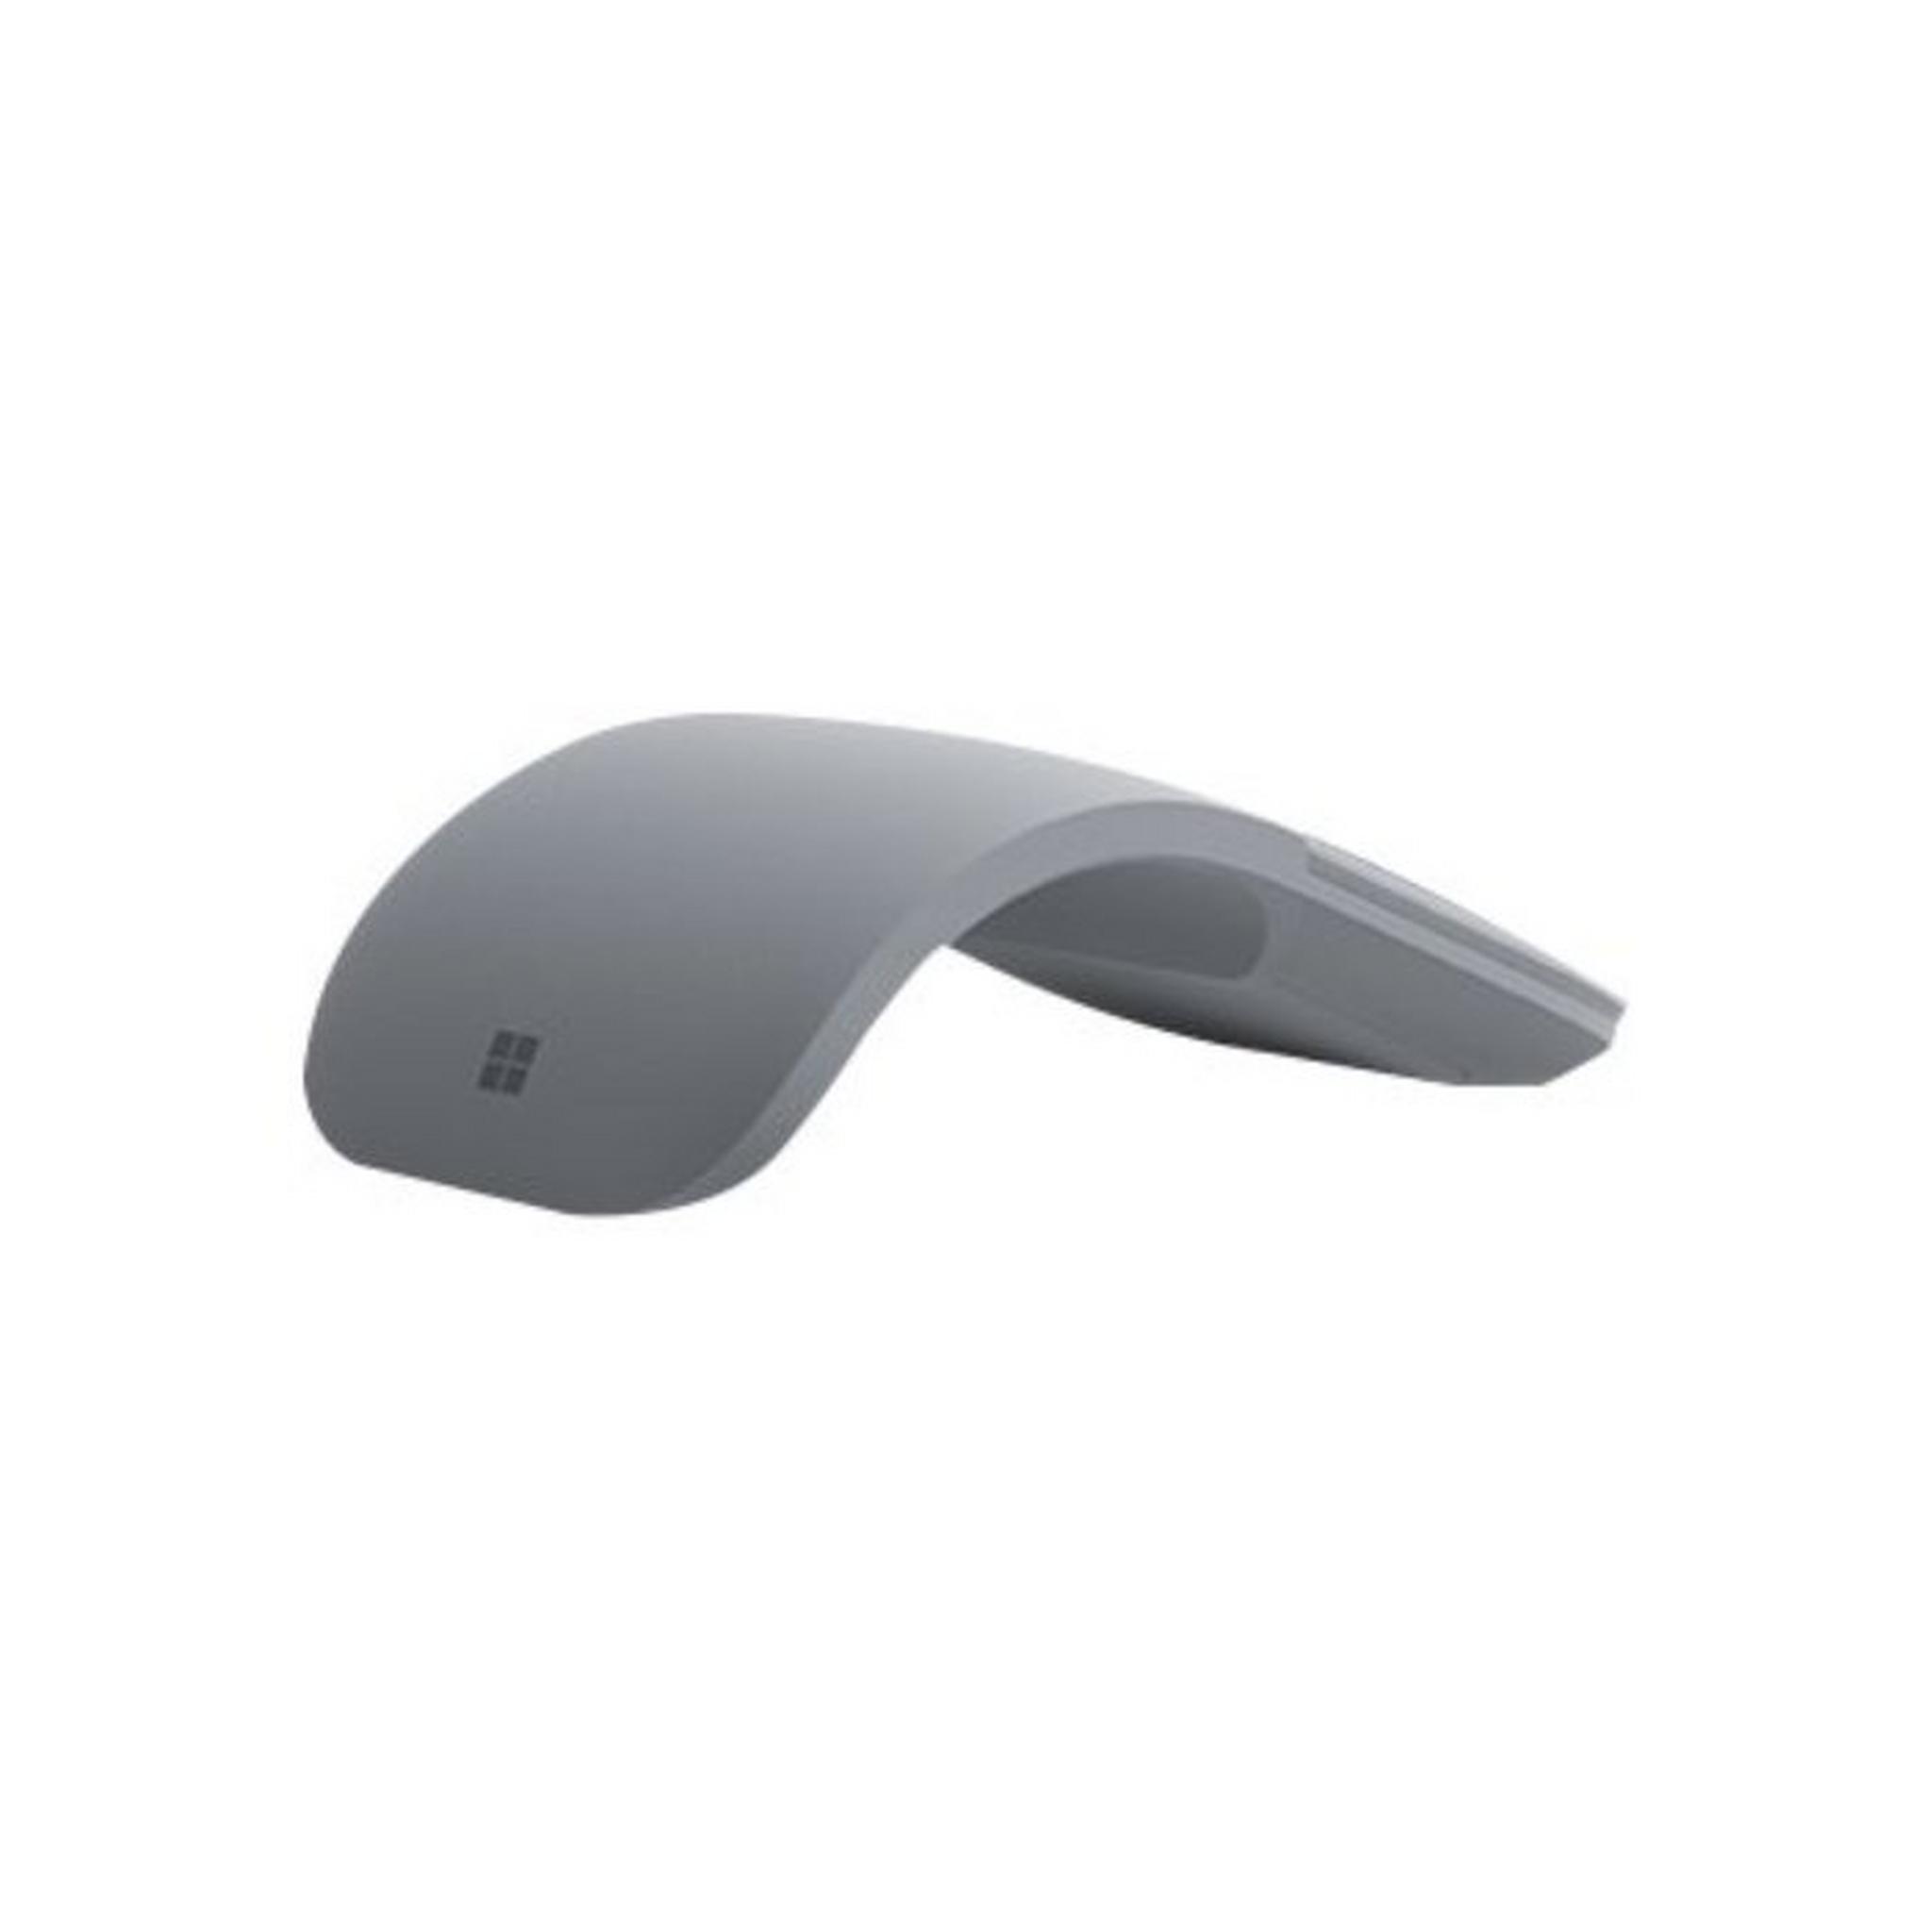 Microsoft Surface Arc Wireless Mouse - Gray